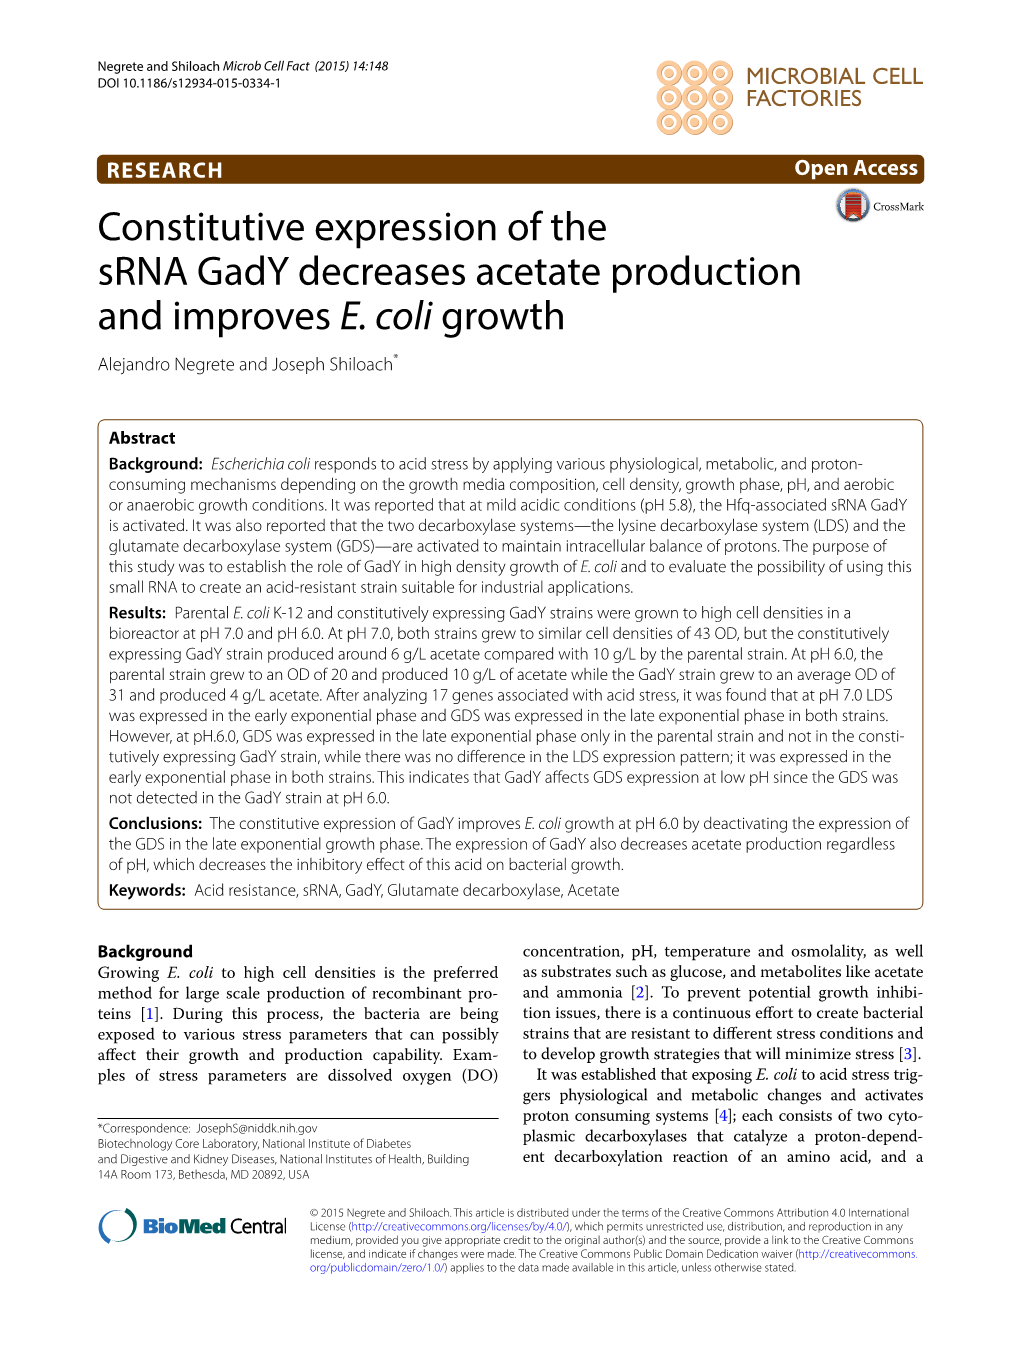 Constitutive Expression of the Srna Gady Decreases Acetate Production and Improves E